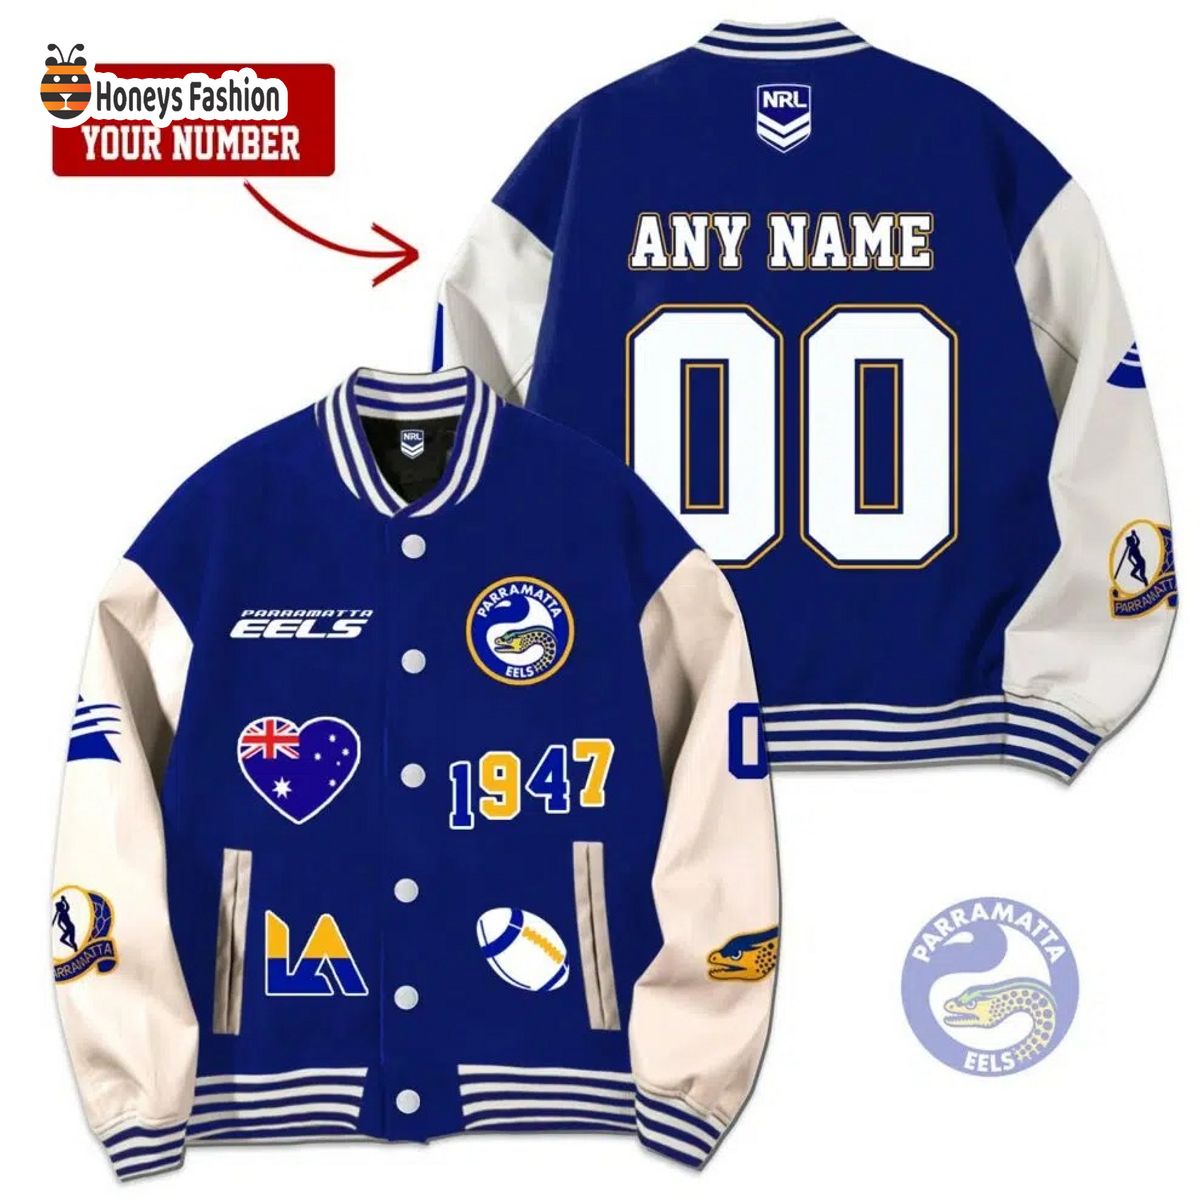 Parramatta Eels Rugby Personalized Jacket